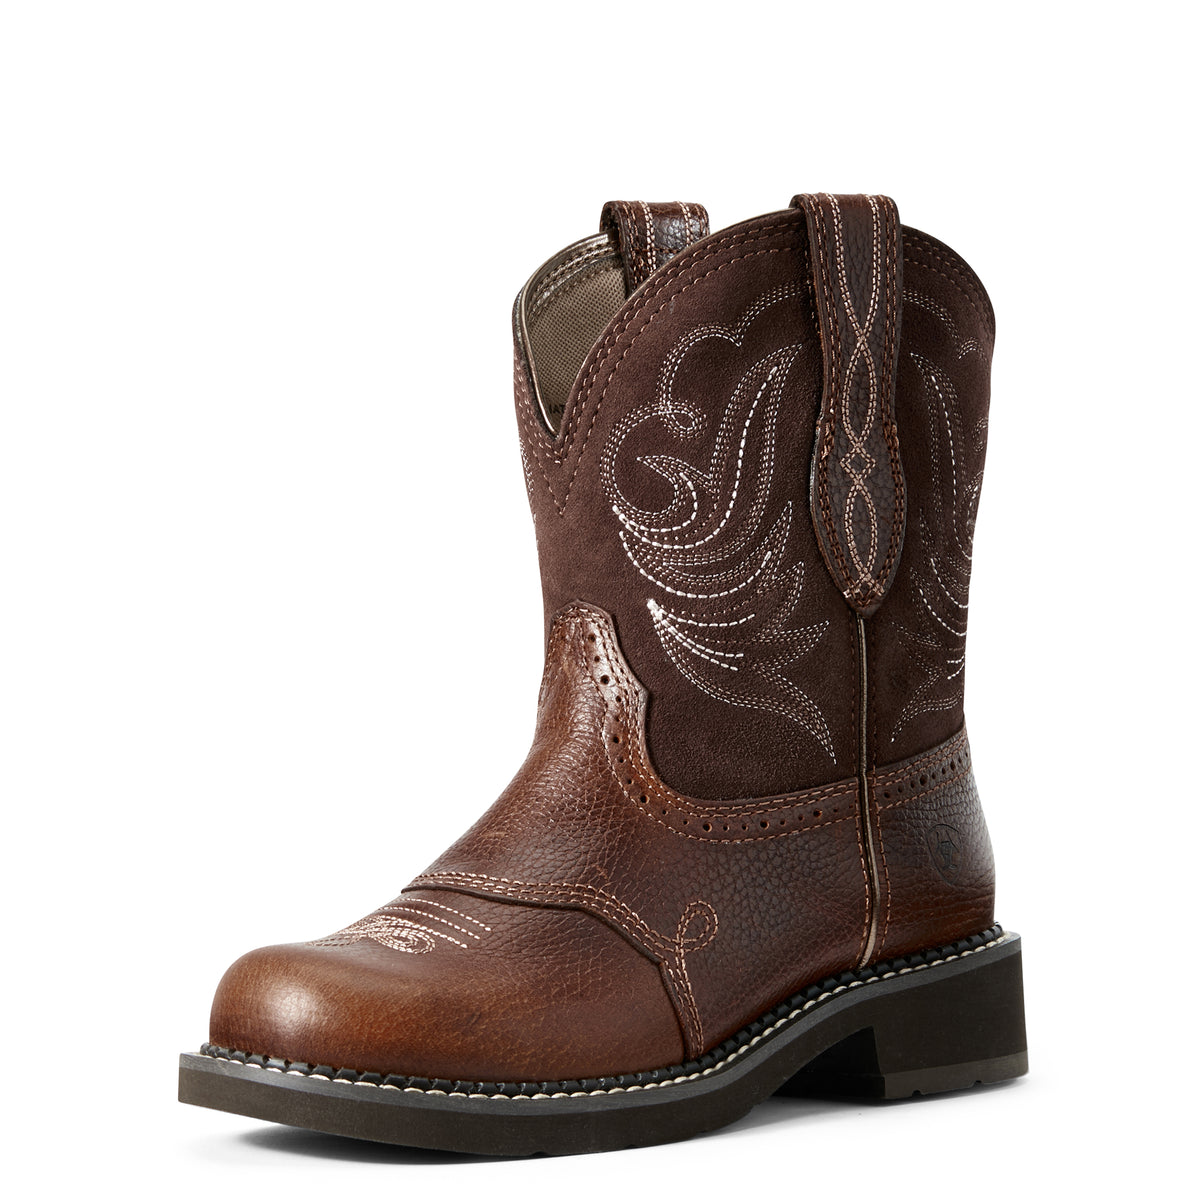 Ariat Womens Heritage Fatbaby Heritage Dapper - Copper Kettle/Brownie